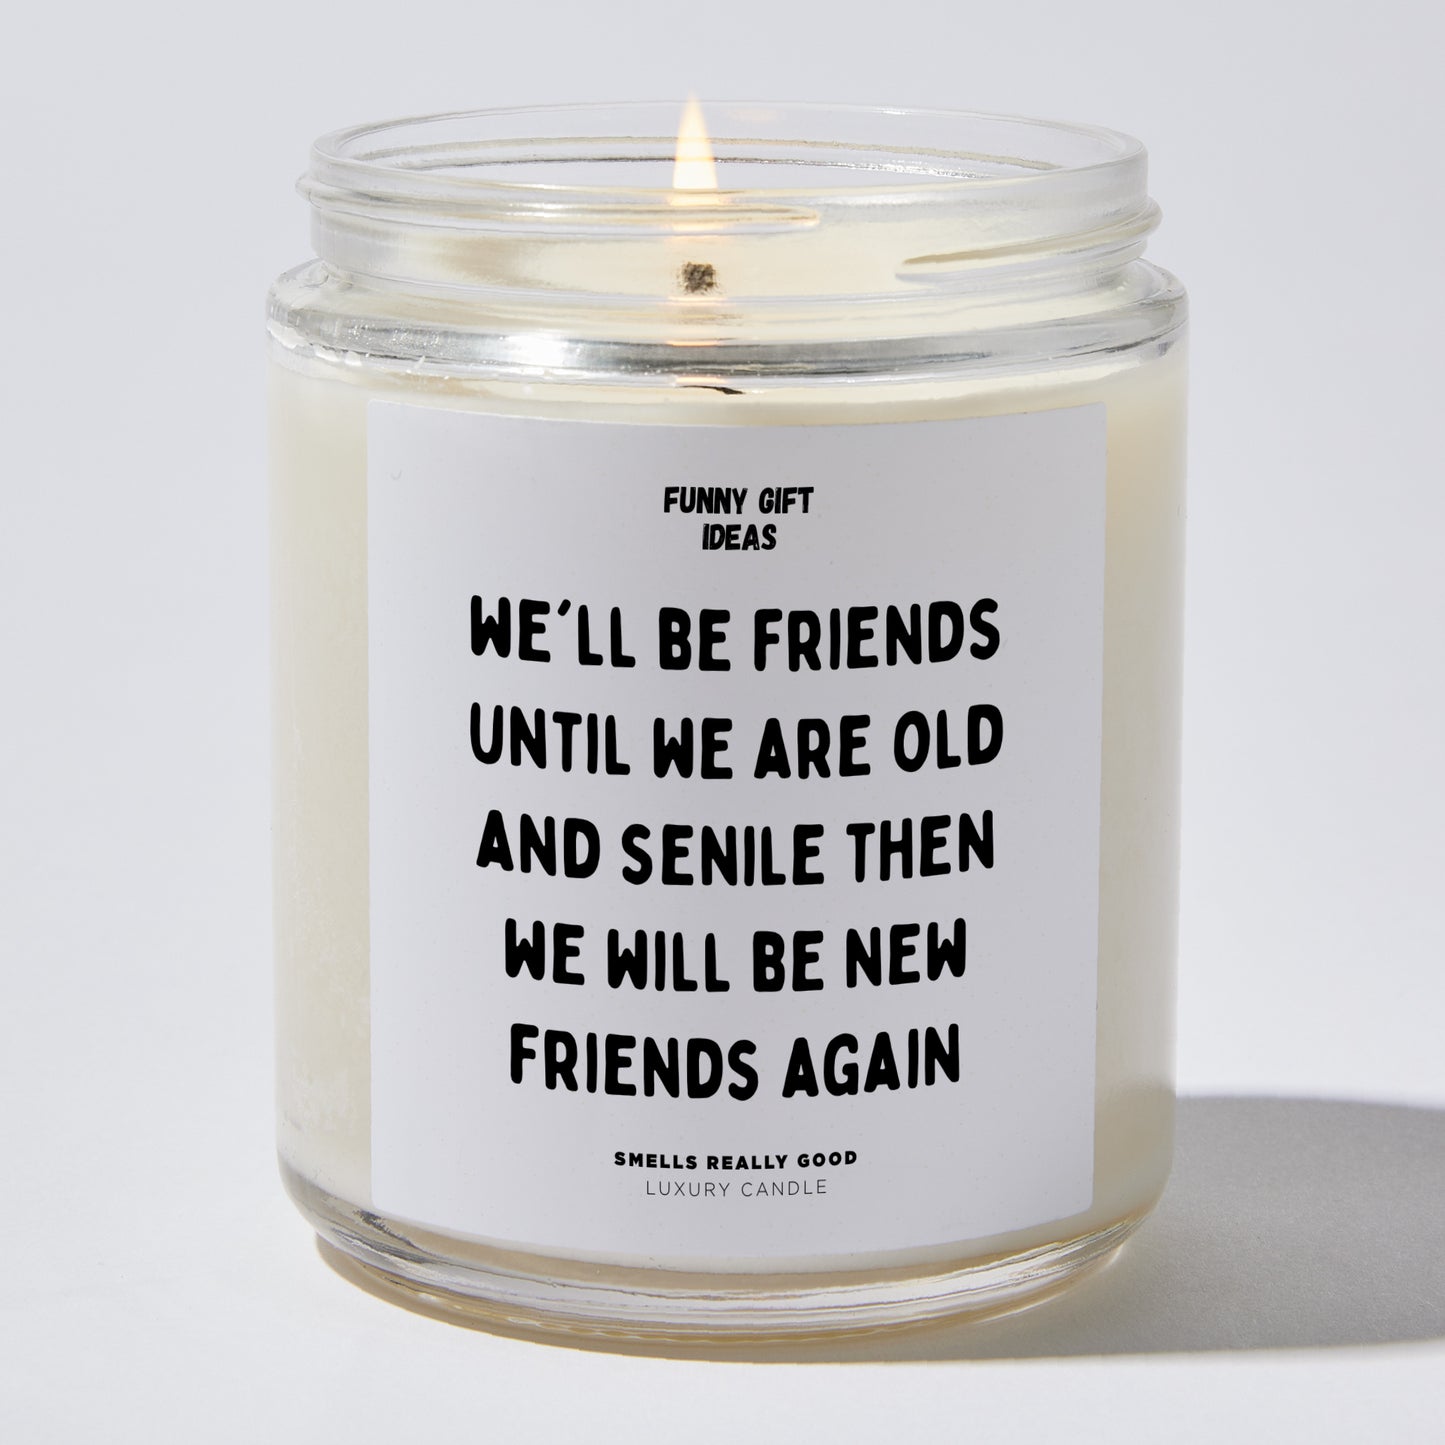 Fun Gift for Friends - We'll Be Friends Until We Are Old And Senile Then We Will Be New Friends Again - Candle